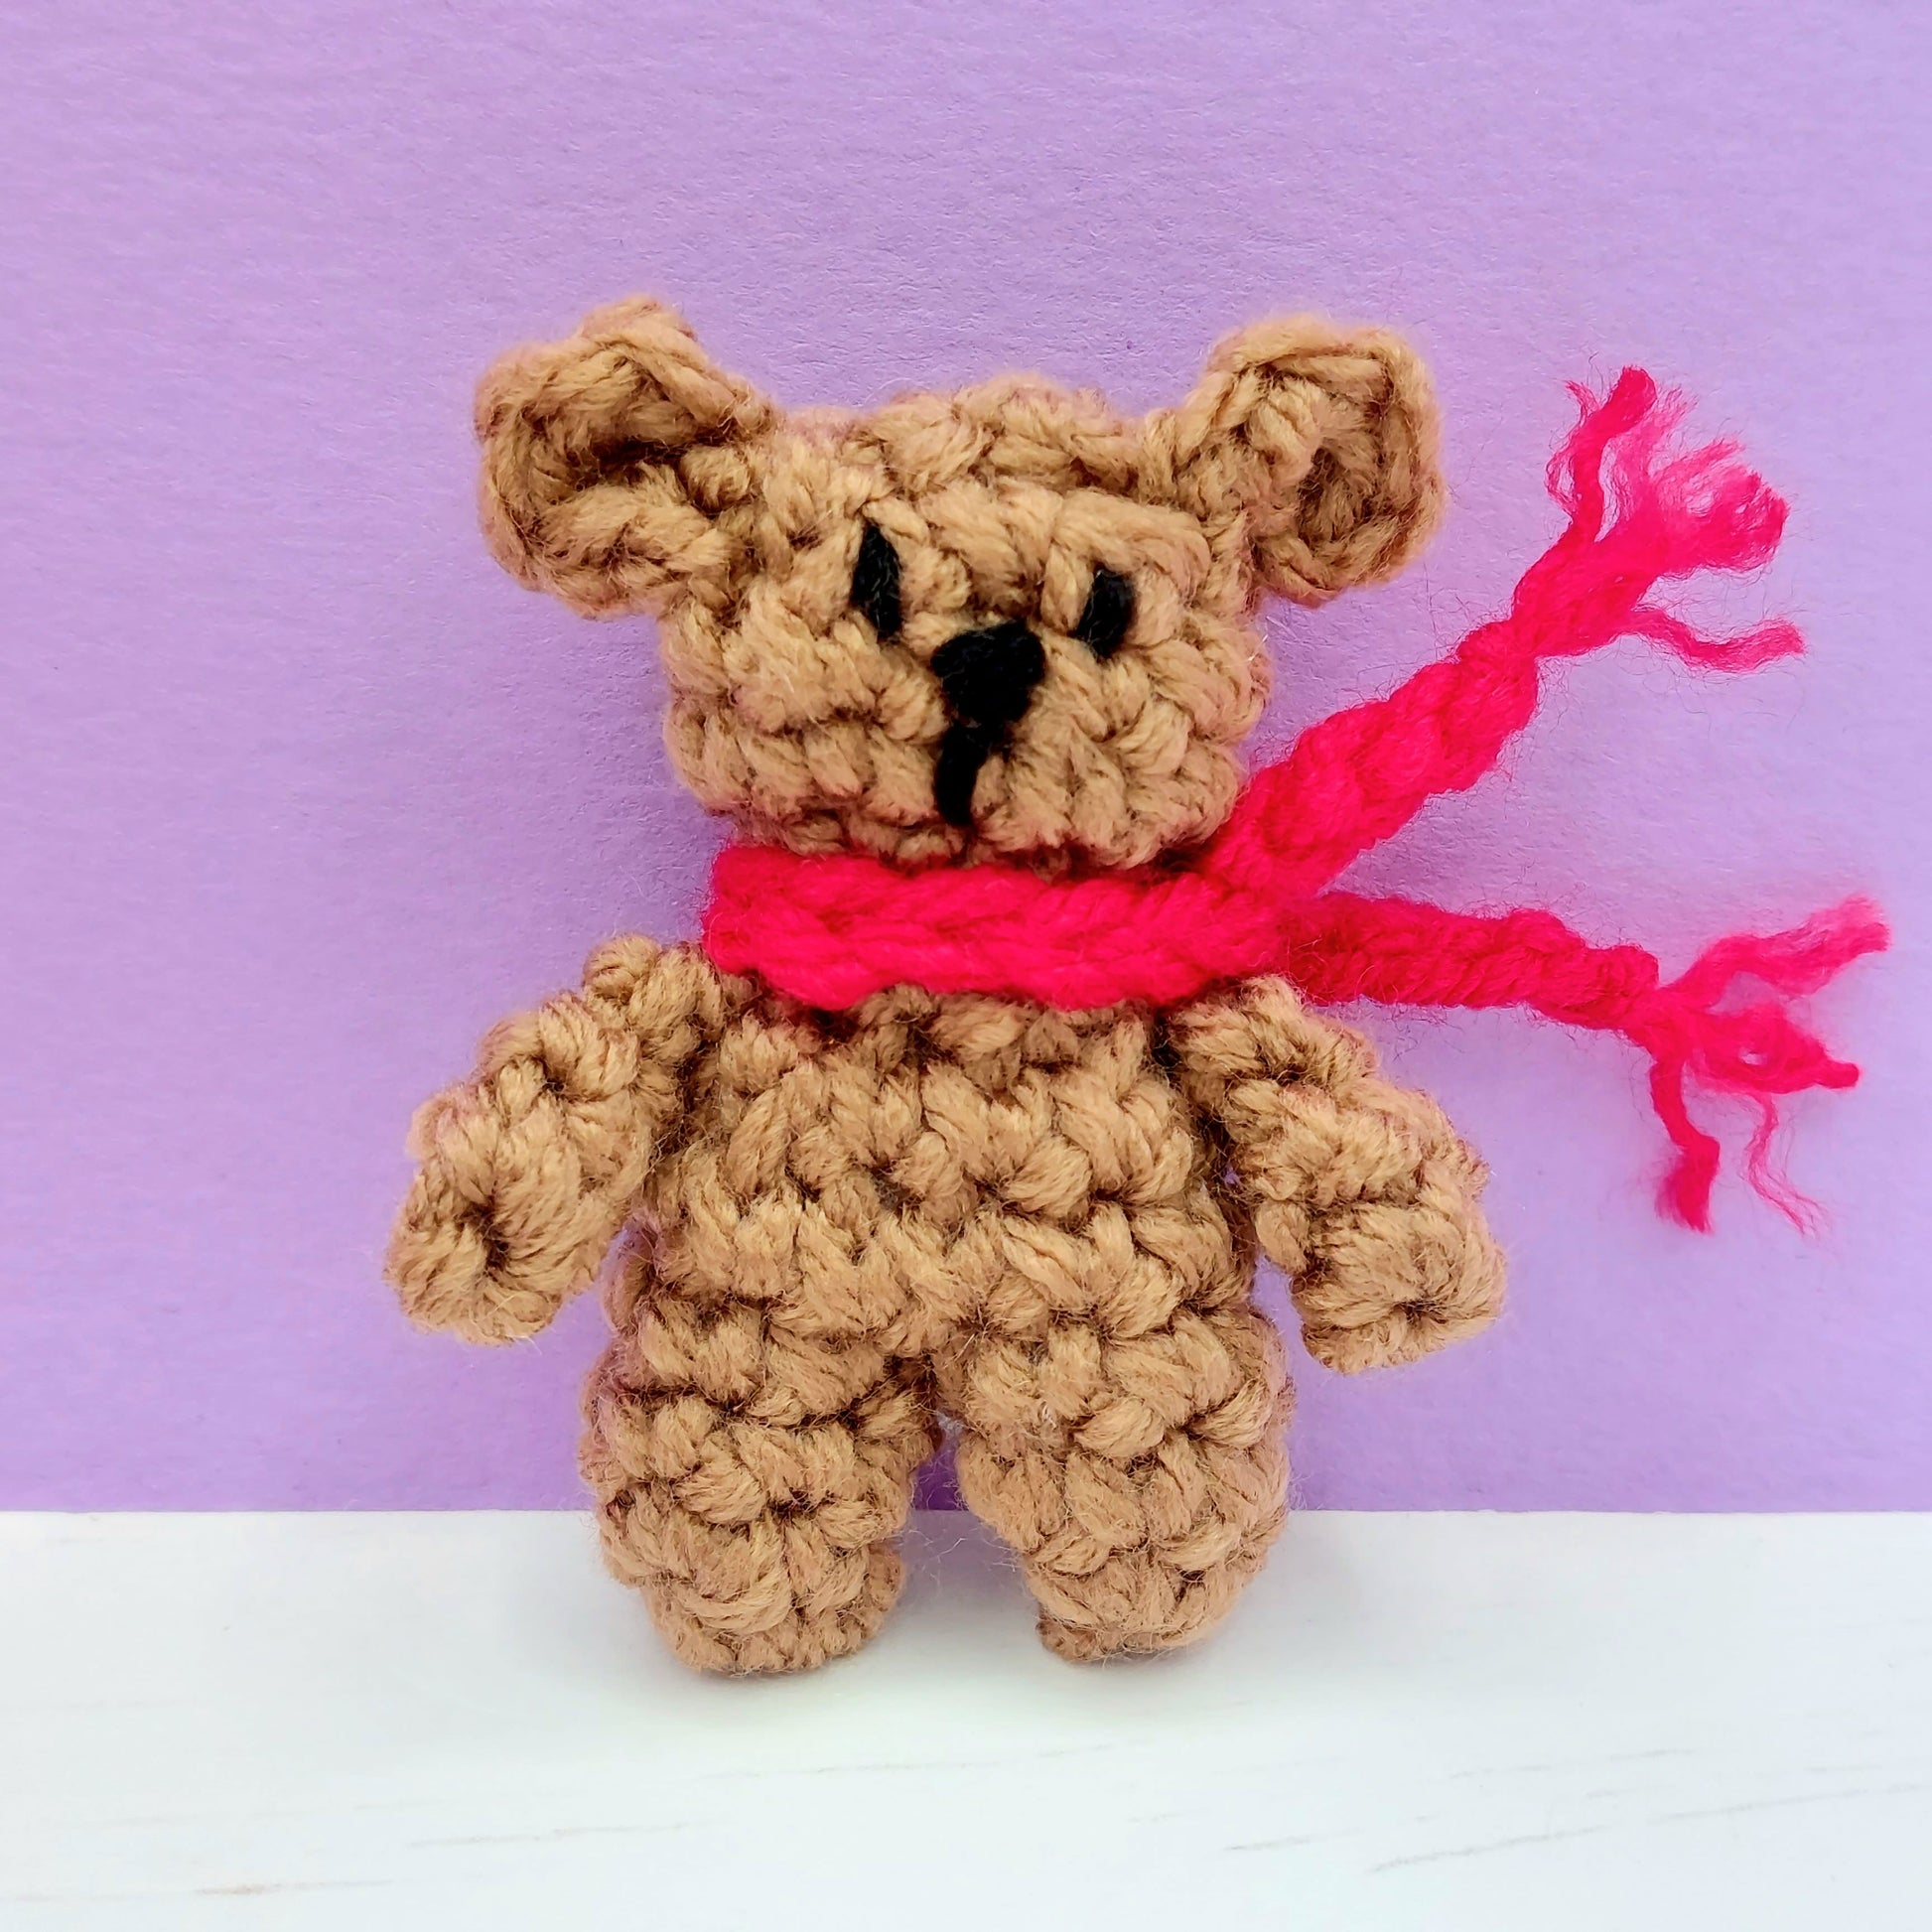 Small crochet teddy bear with red scarf